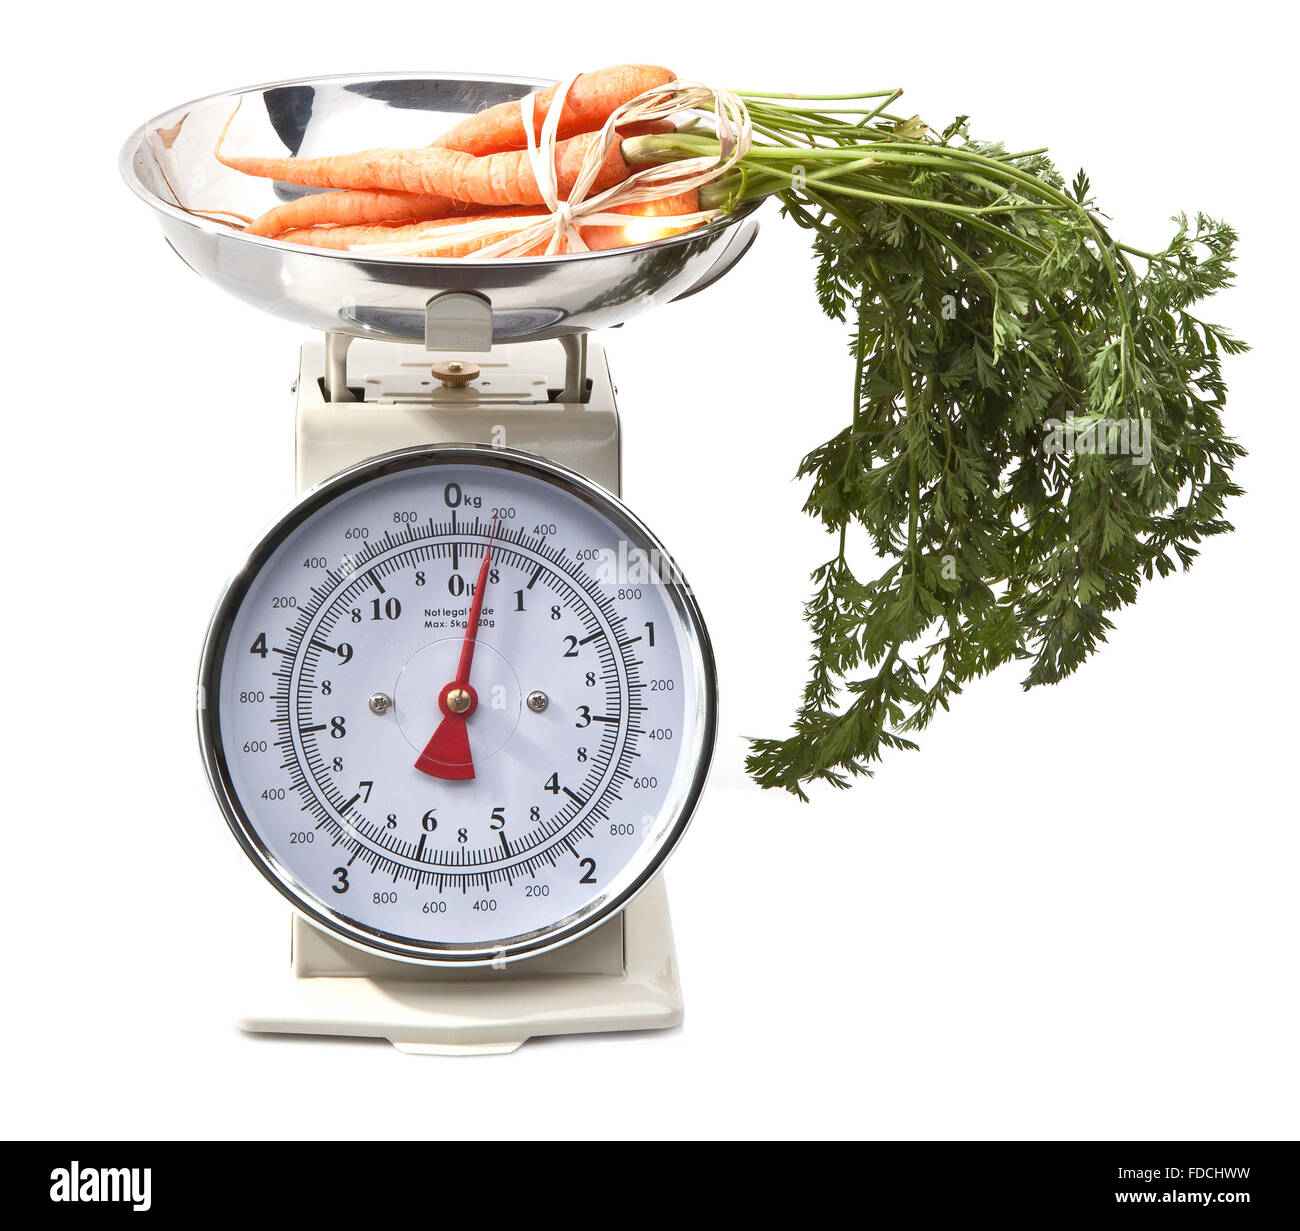 Old style kitchen scales with carrots on white background Isolated Stock Photo